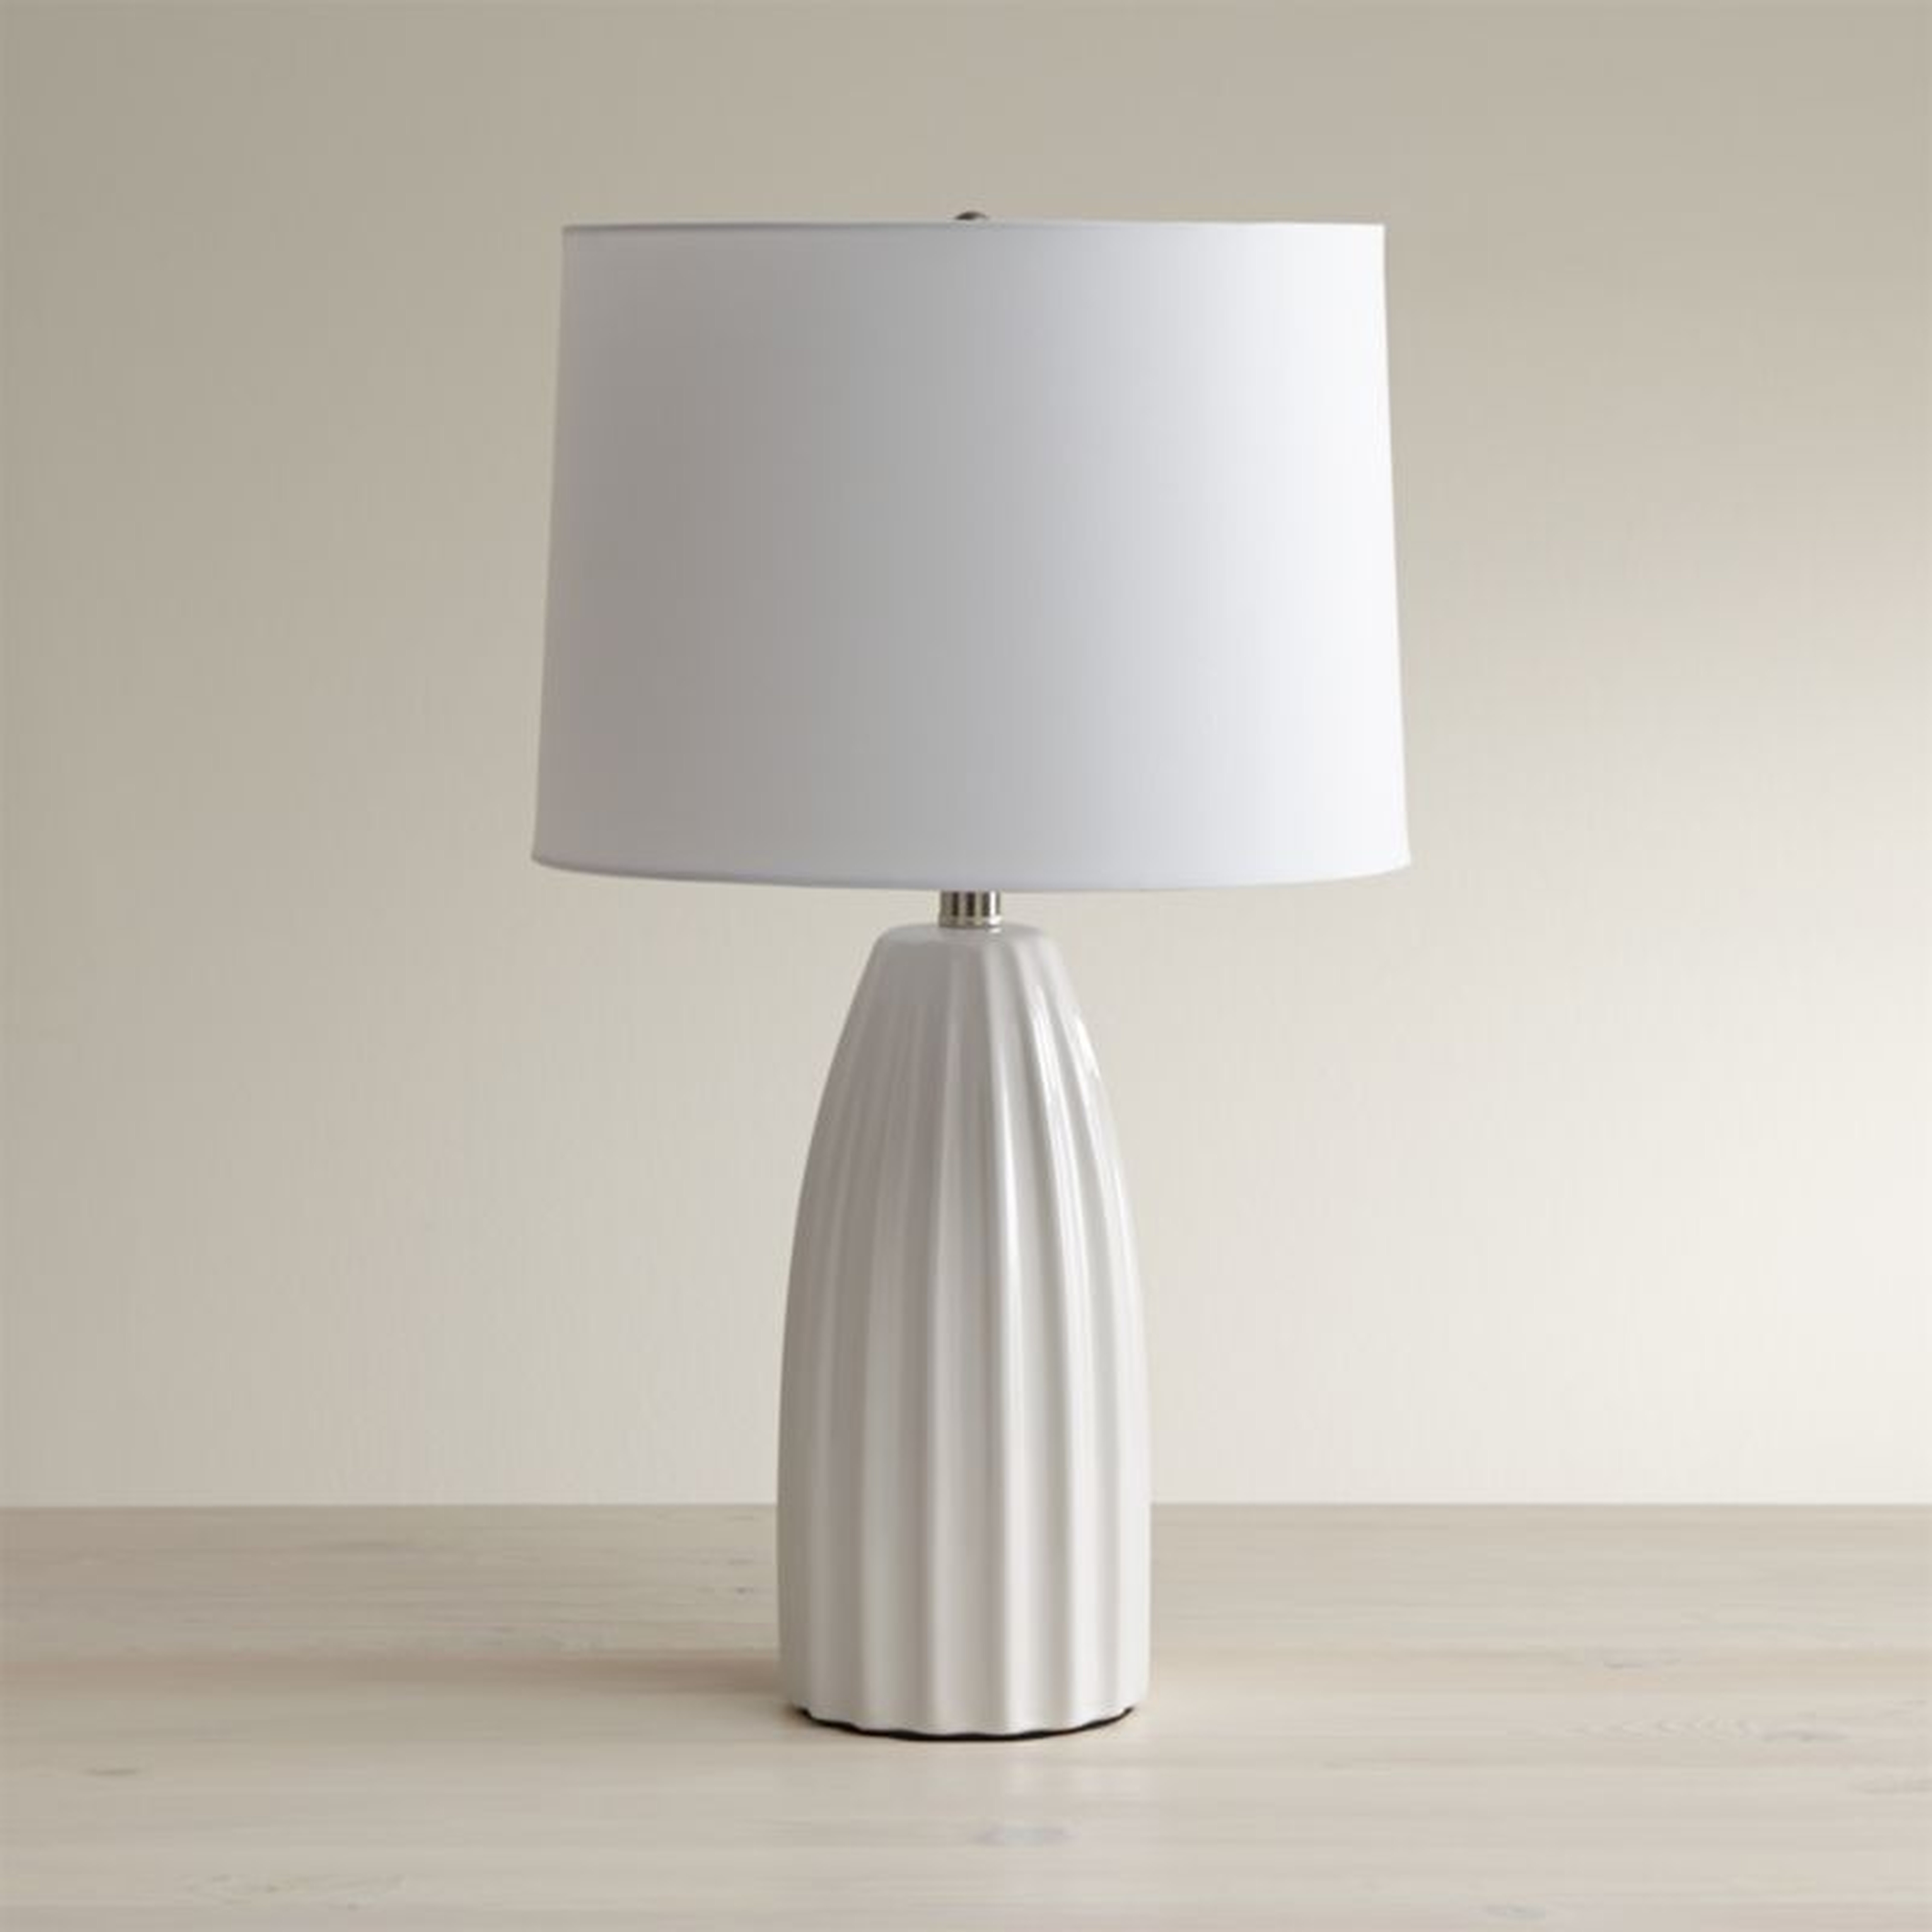 Ella White Table Lamp - Crate and Barrel